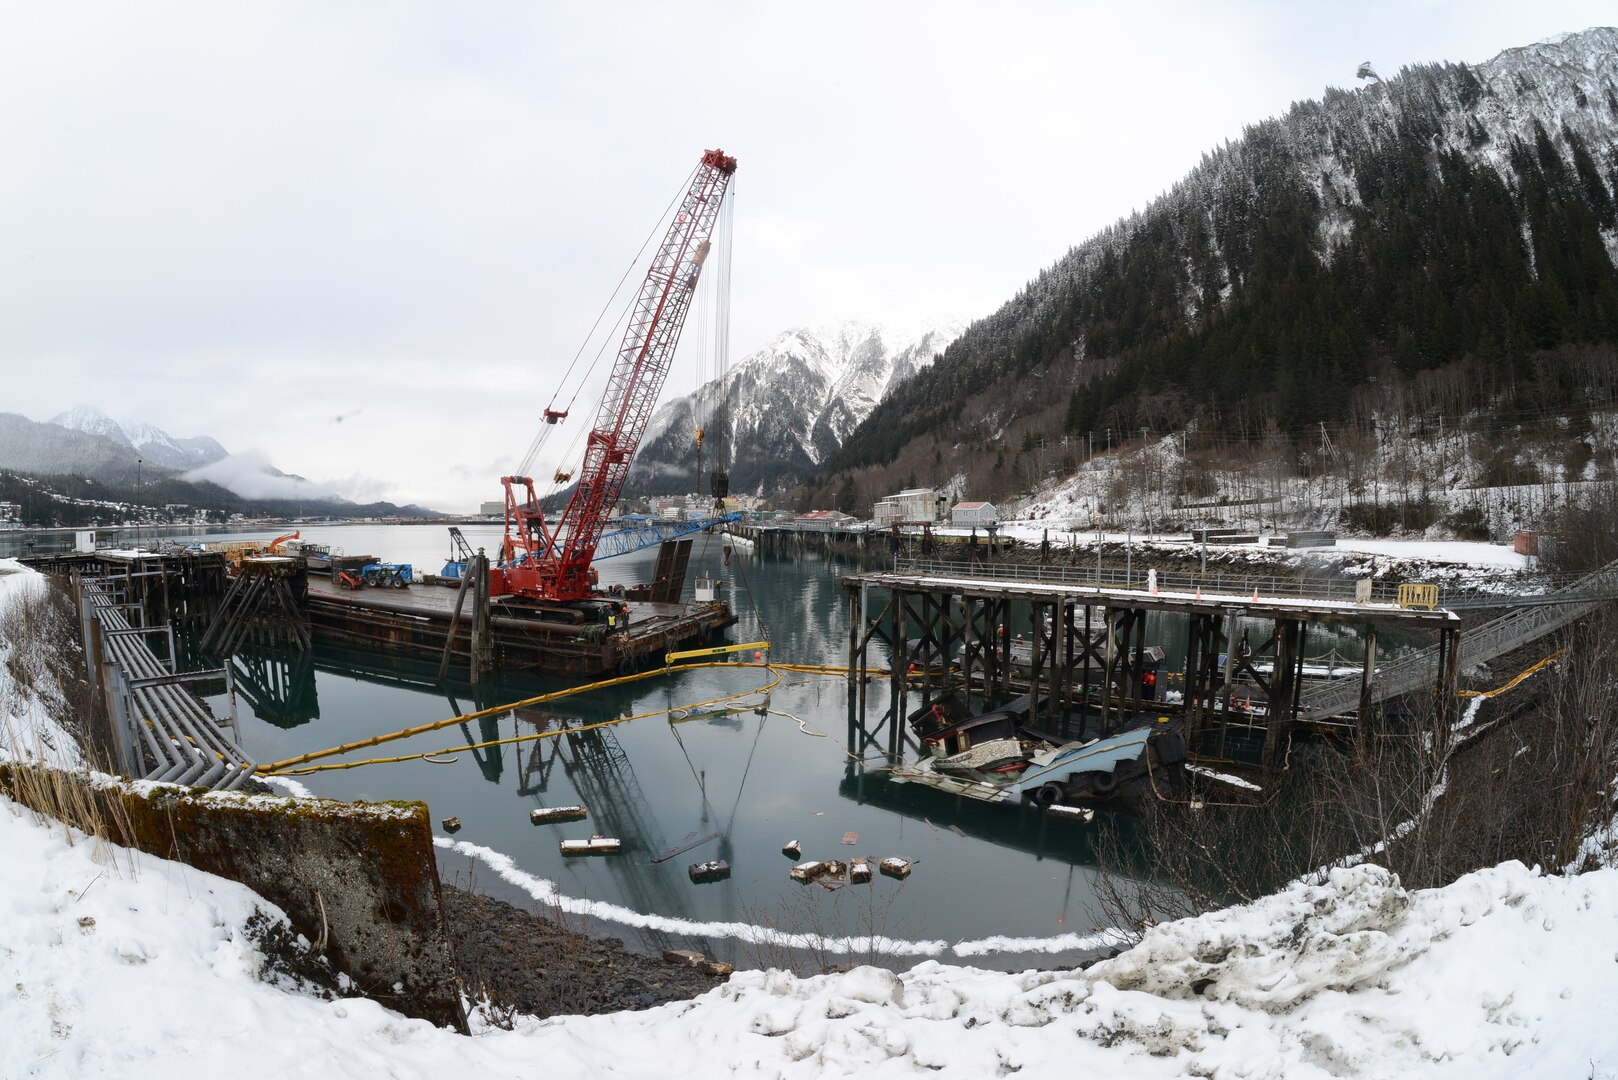 The Tagish, a 107-foot tugboat, built during World War II, is submerged at the Gastineau Channel dock in Juneau, Alaska, Feb. 9, 2023